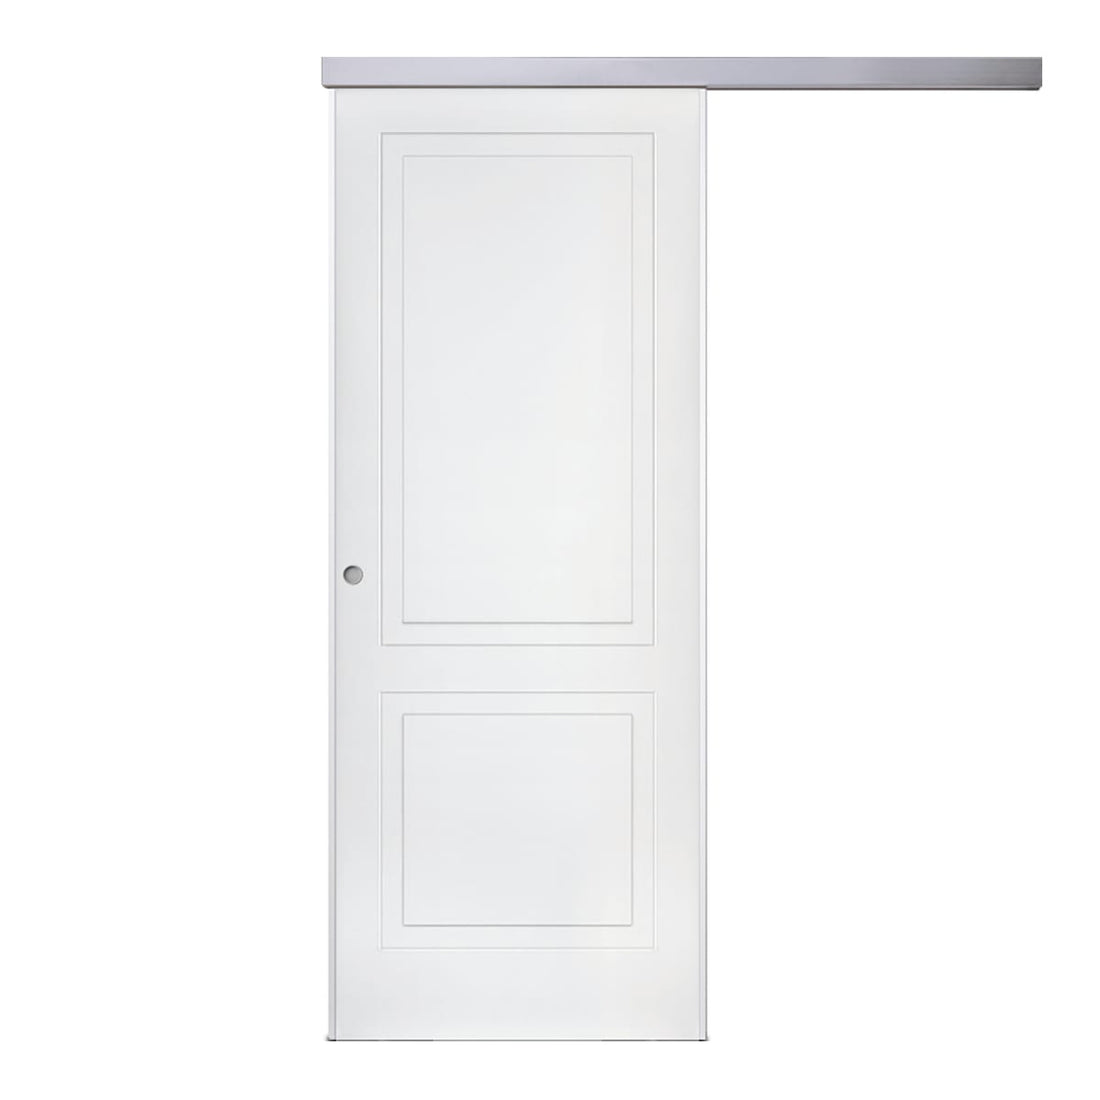 SEDNA SLIDING DOOR OUTSIDE WALL 210 X 80 WHITE LACQUERED